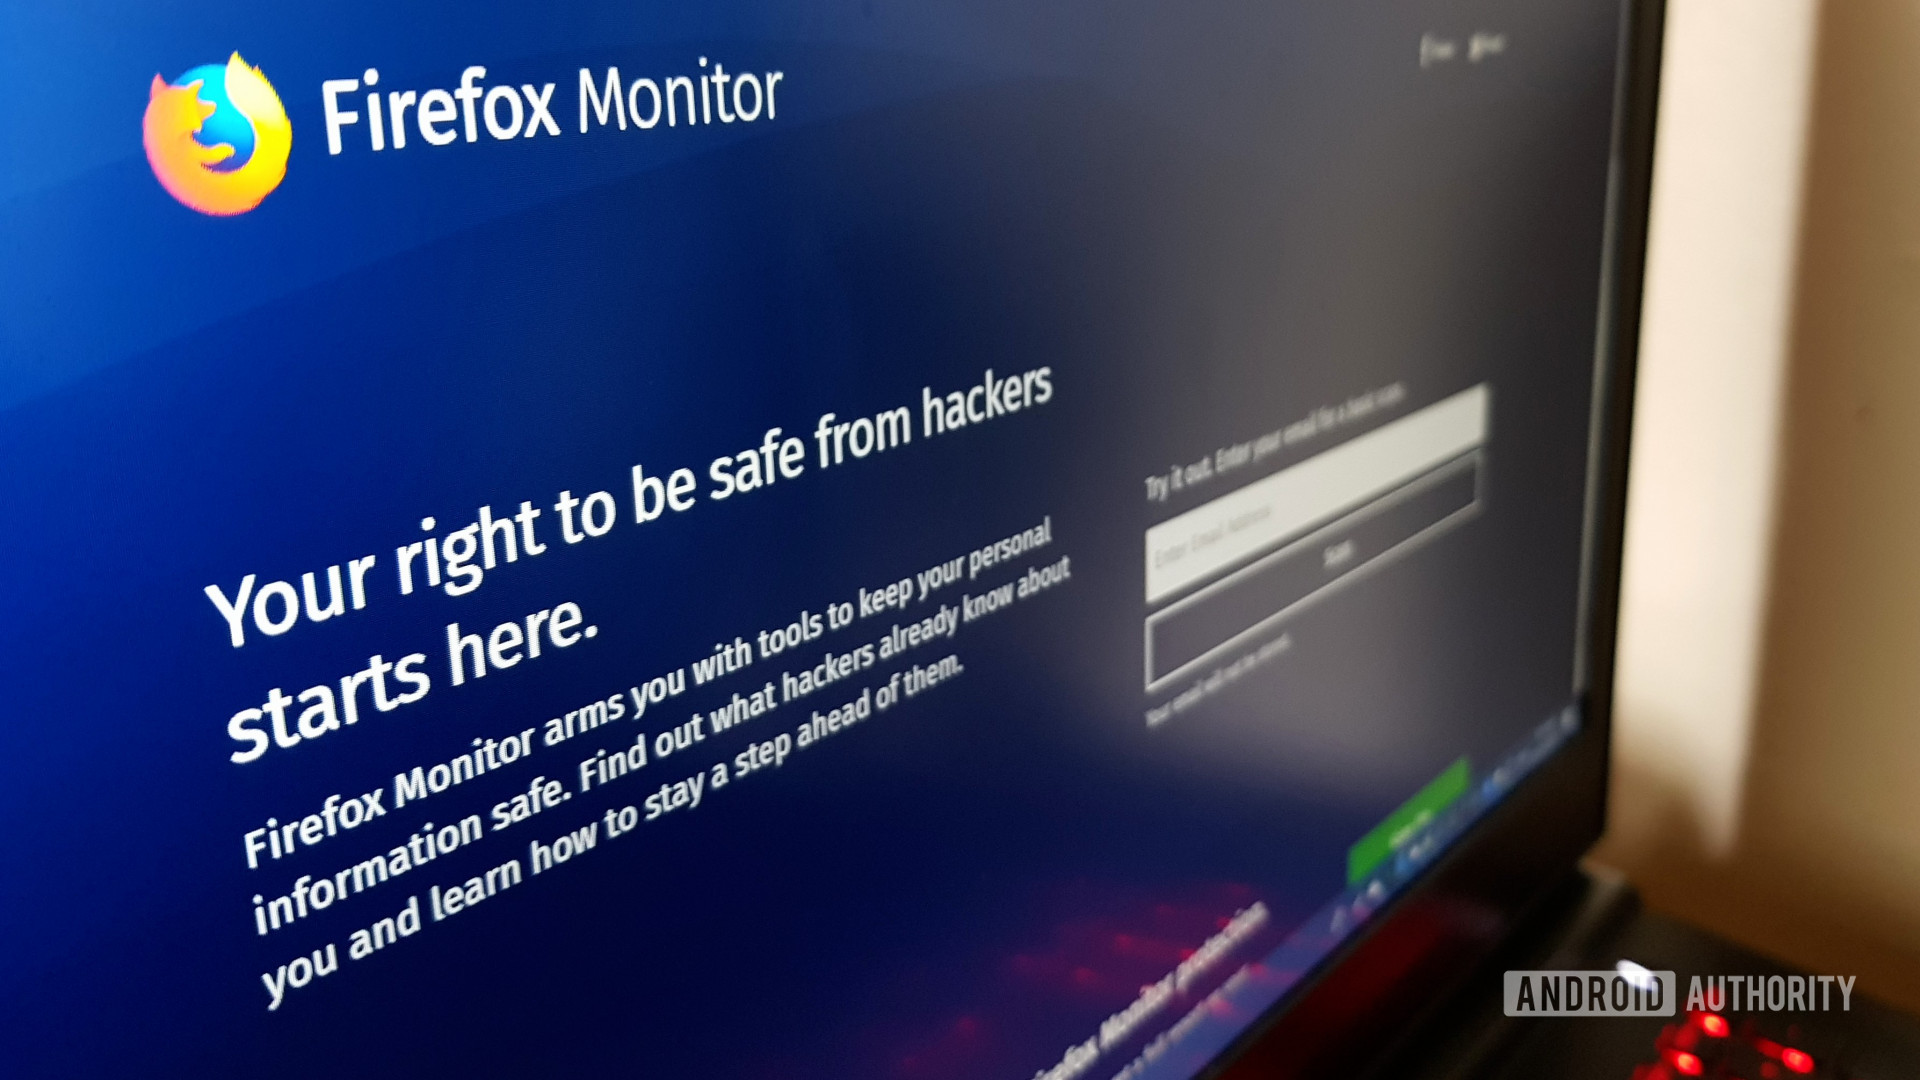 The Firefox Monitor website.